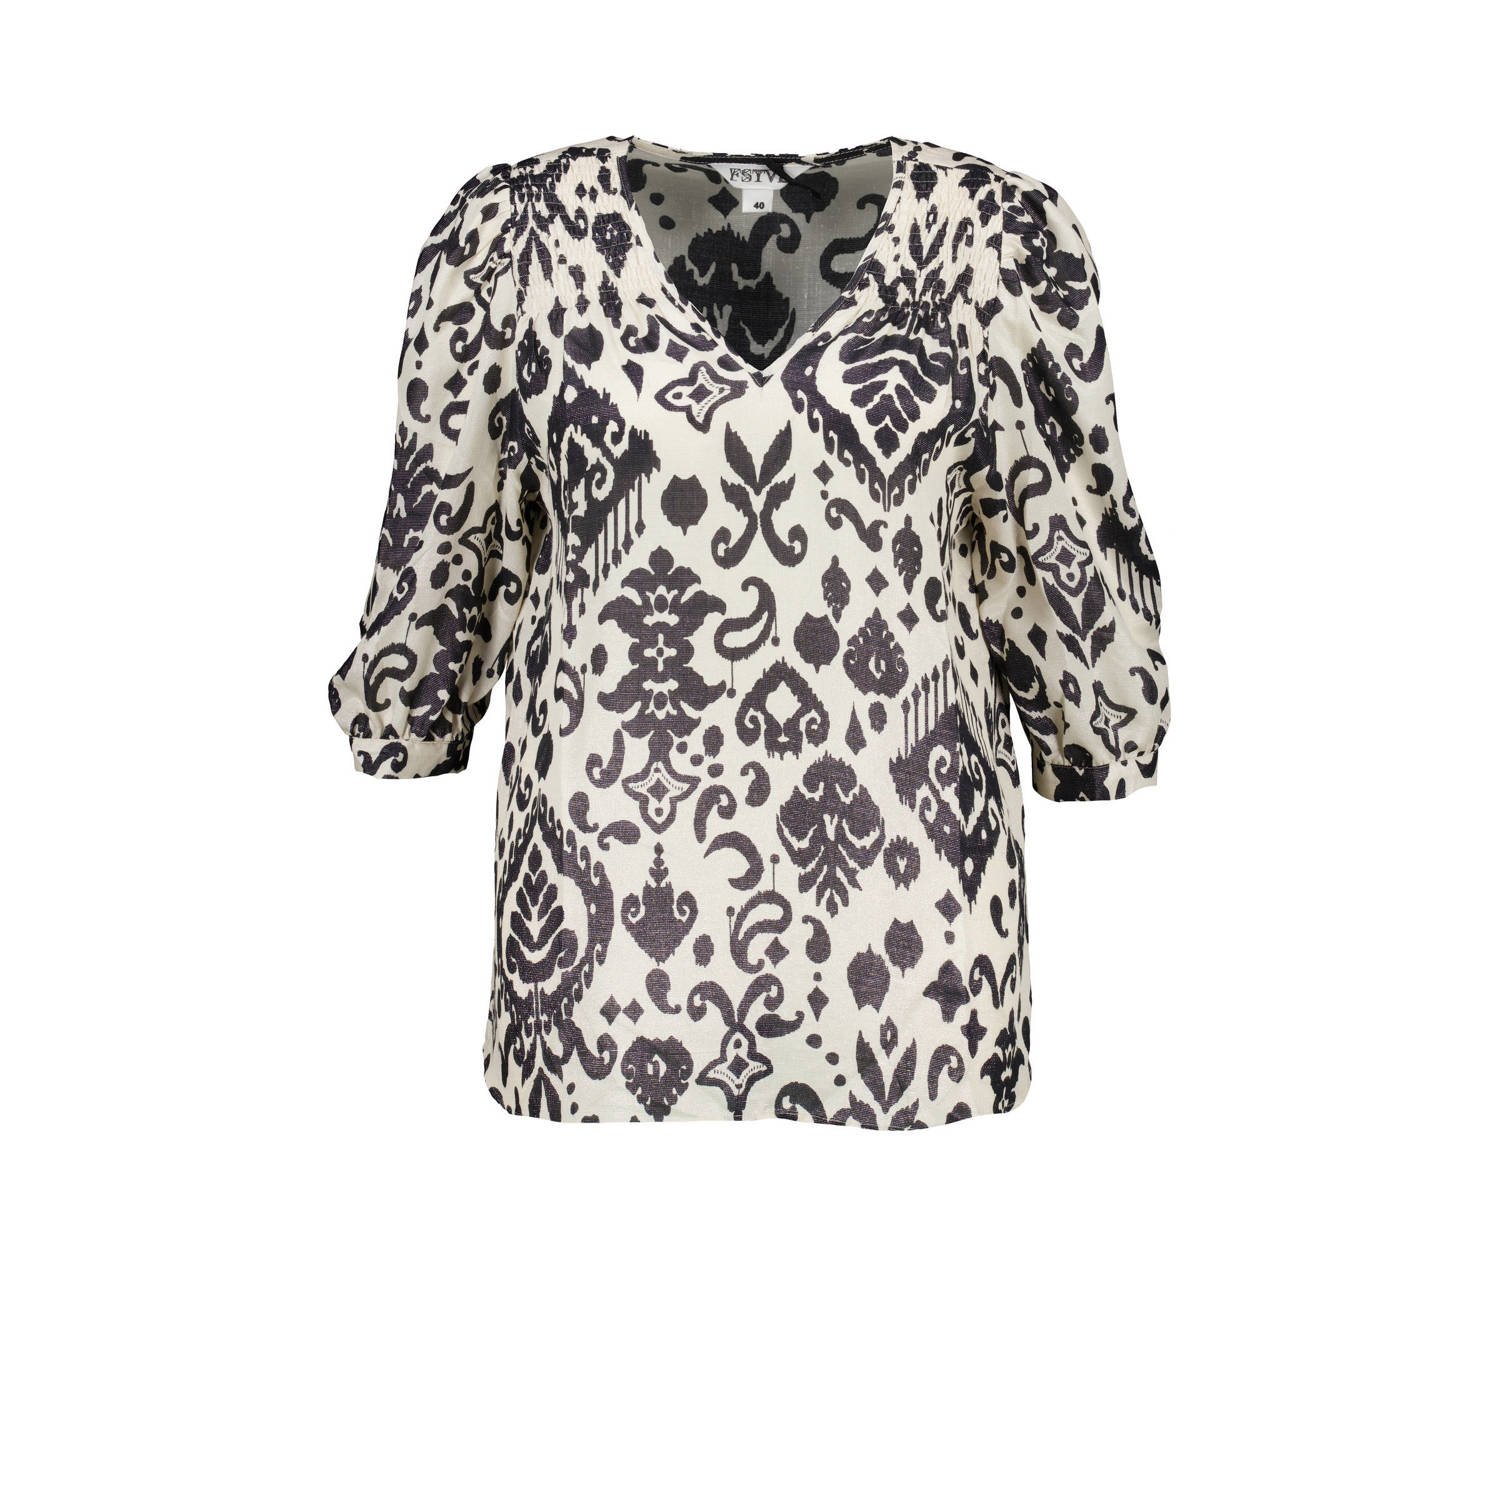 MS Mode blouse met all over print